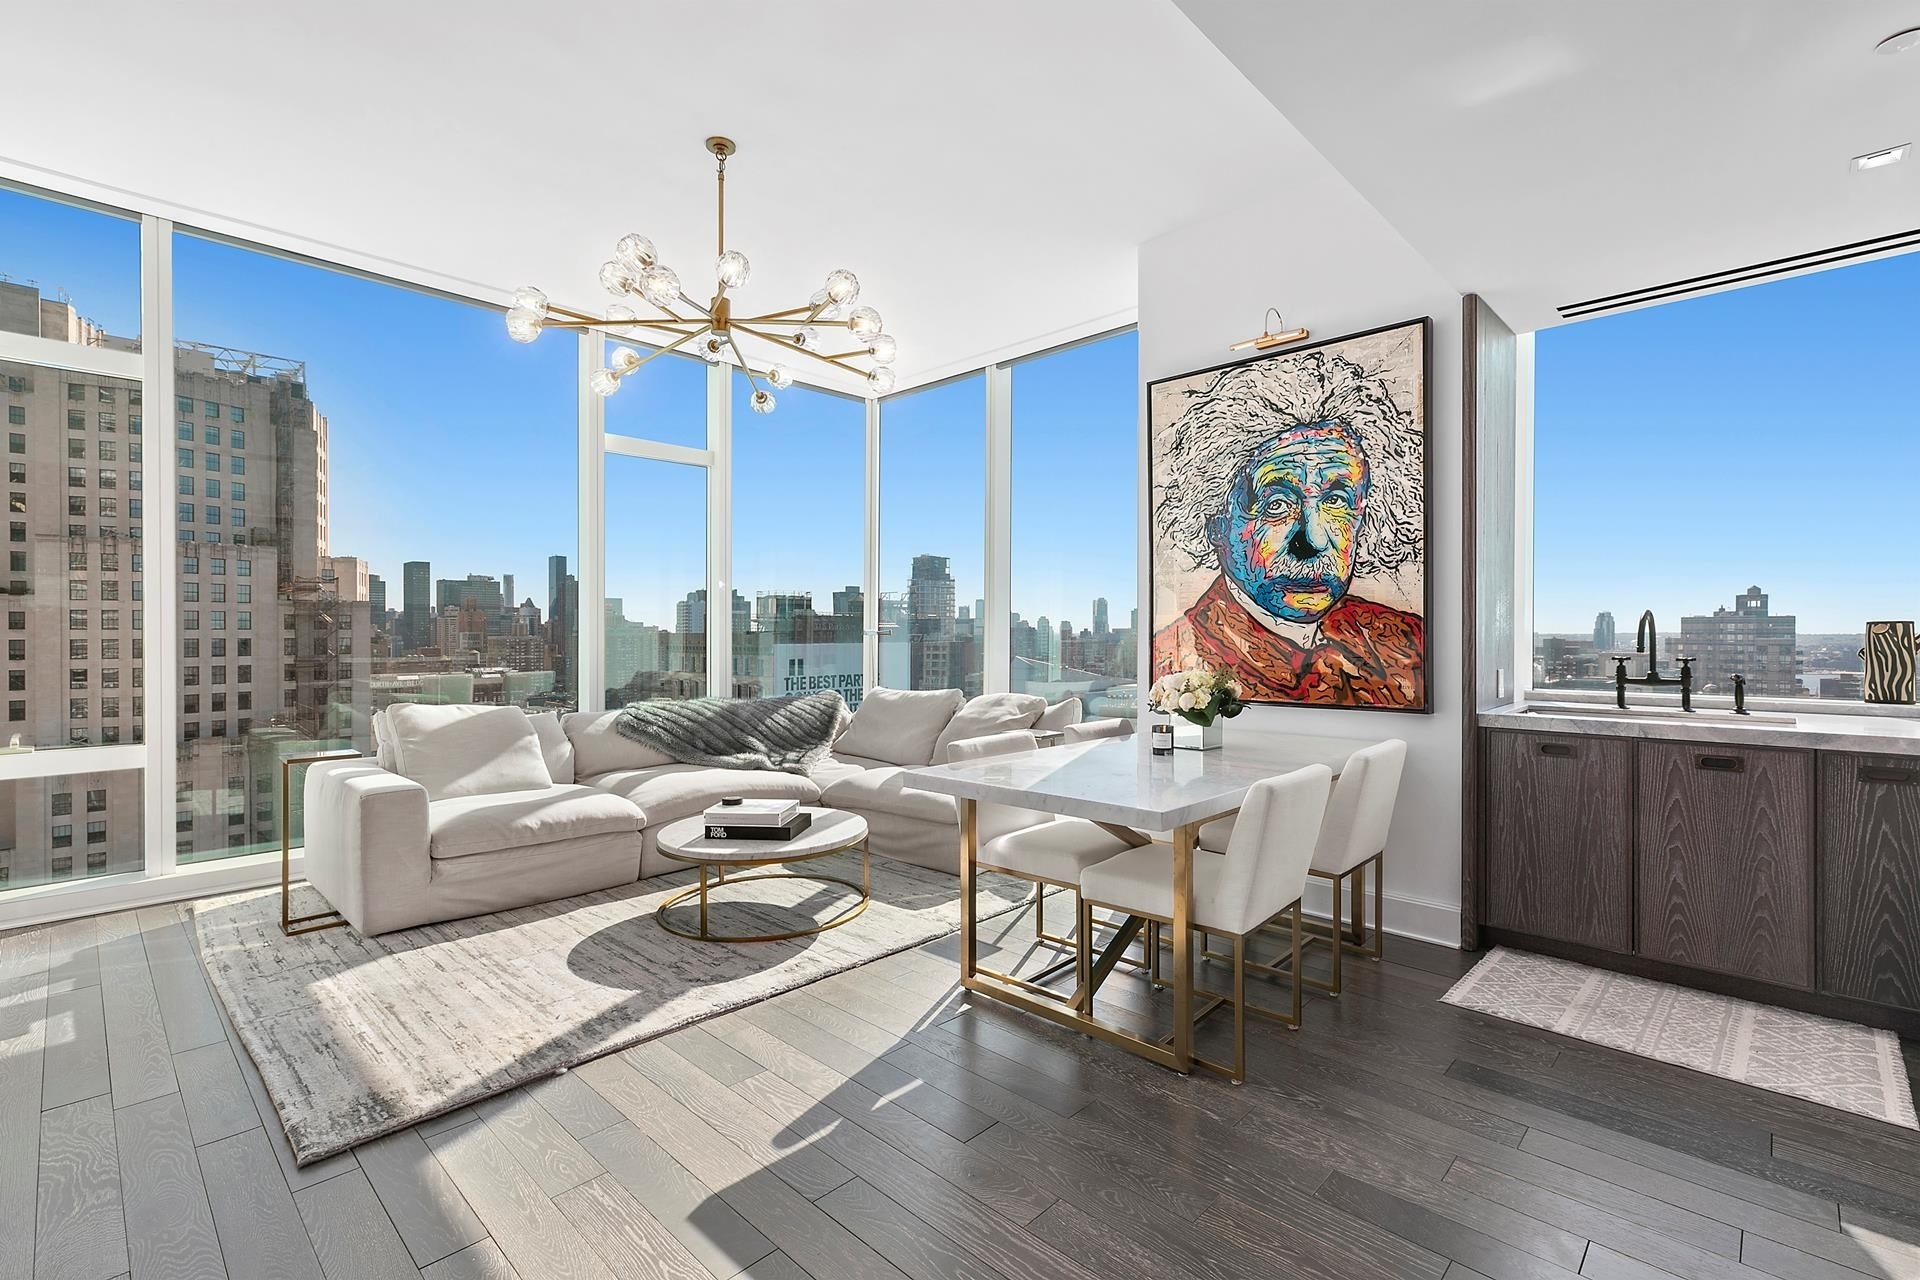 Property at Madison Square Park Tower, 45 E 22ND ST , 29B New York